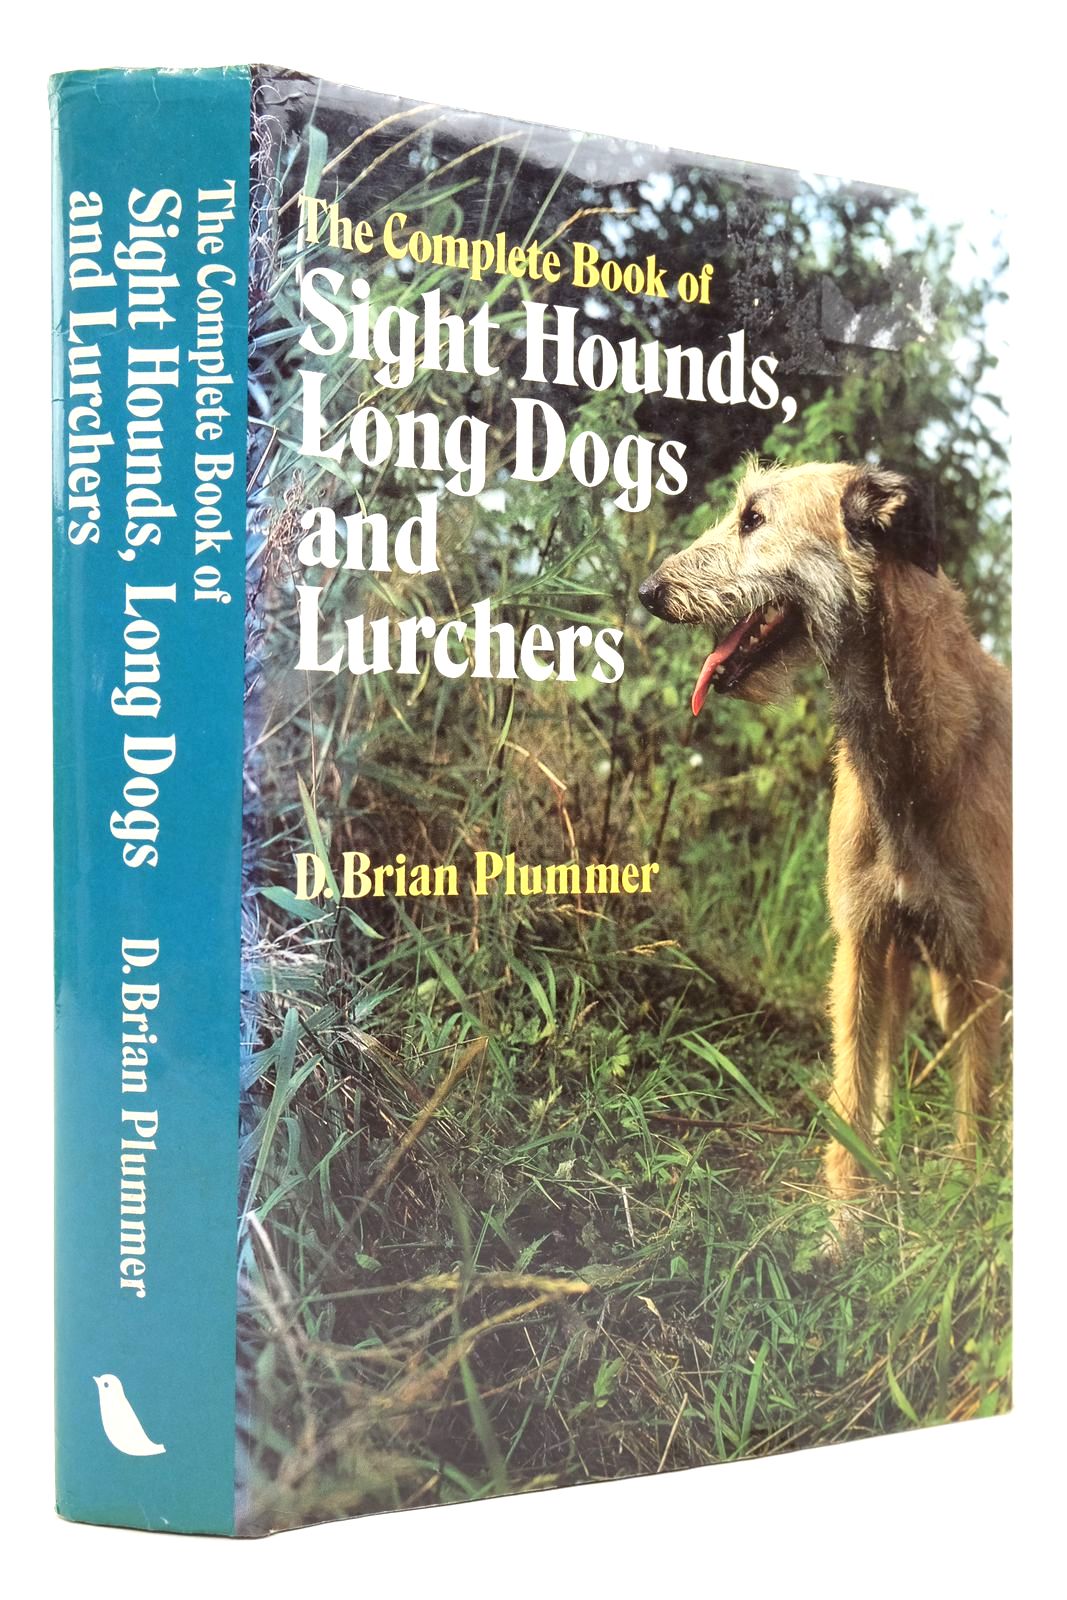 Photo of THE COMPLETE BOOK OF SIGHT HOUNDS, LONG DOGS AND LURCHERS written by Plummer, David Brian published by Robinson Publishing (STOCK CODE: 2140249)  for sale by Stella & Rose's Books